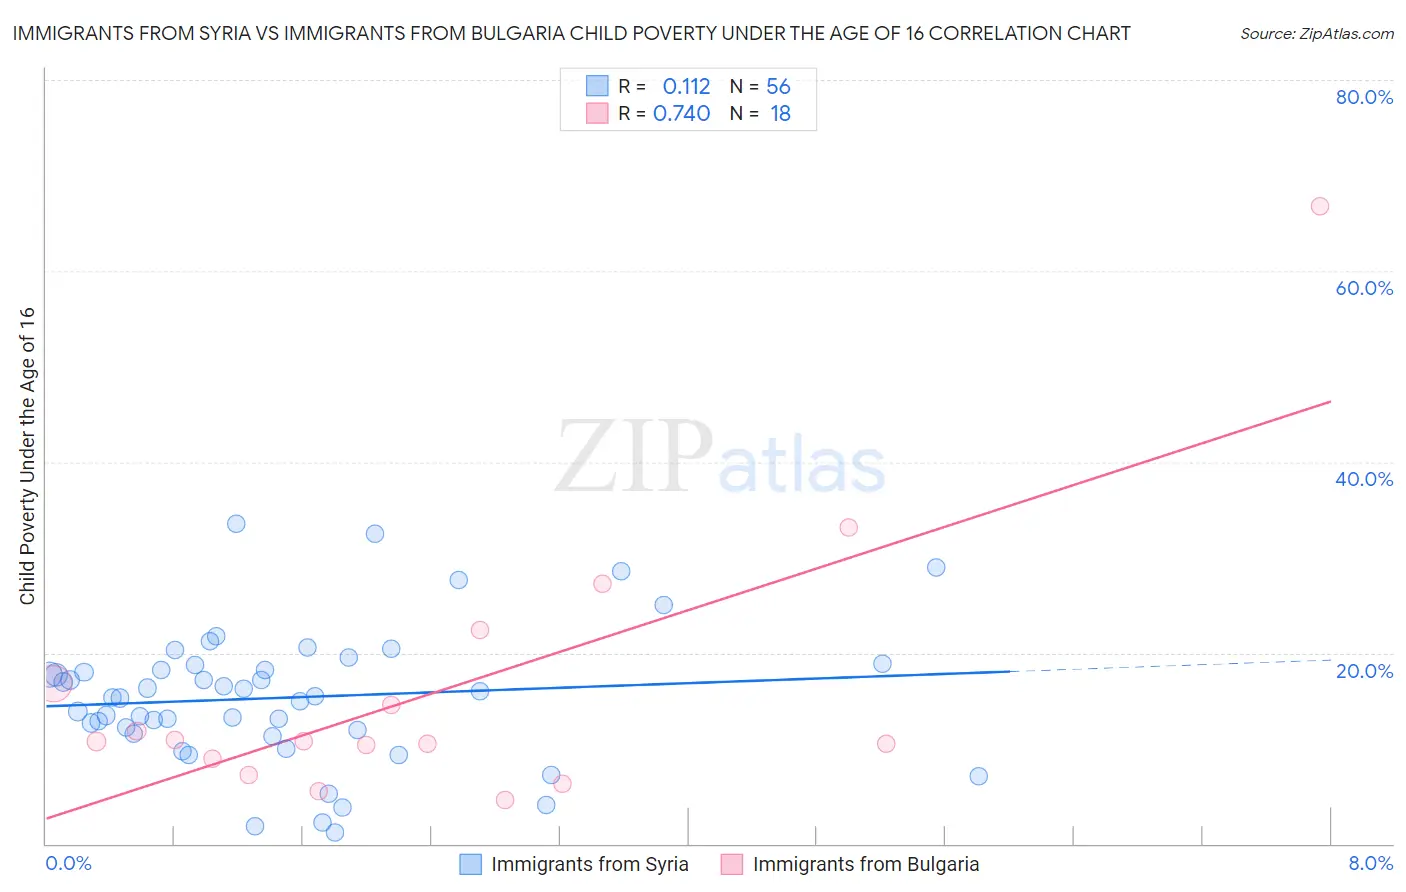 Immigrants from Syria vs Immigrants from Bulgaria Child Poverty Under the Age of 16